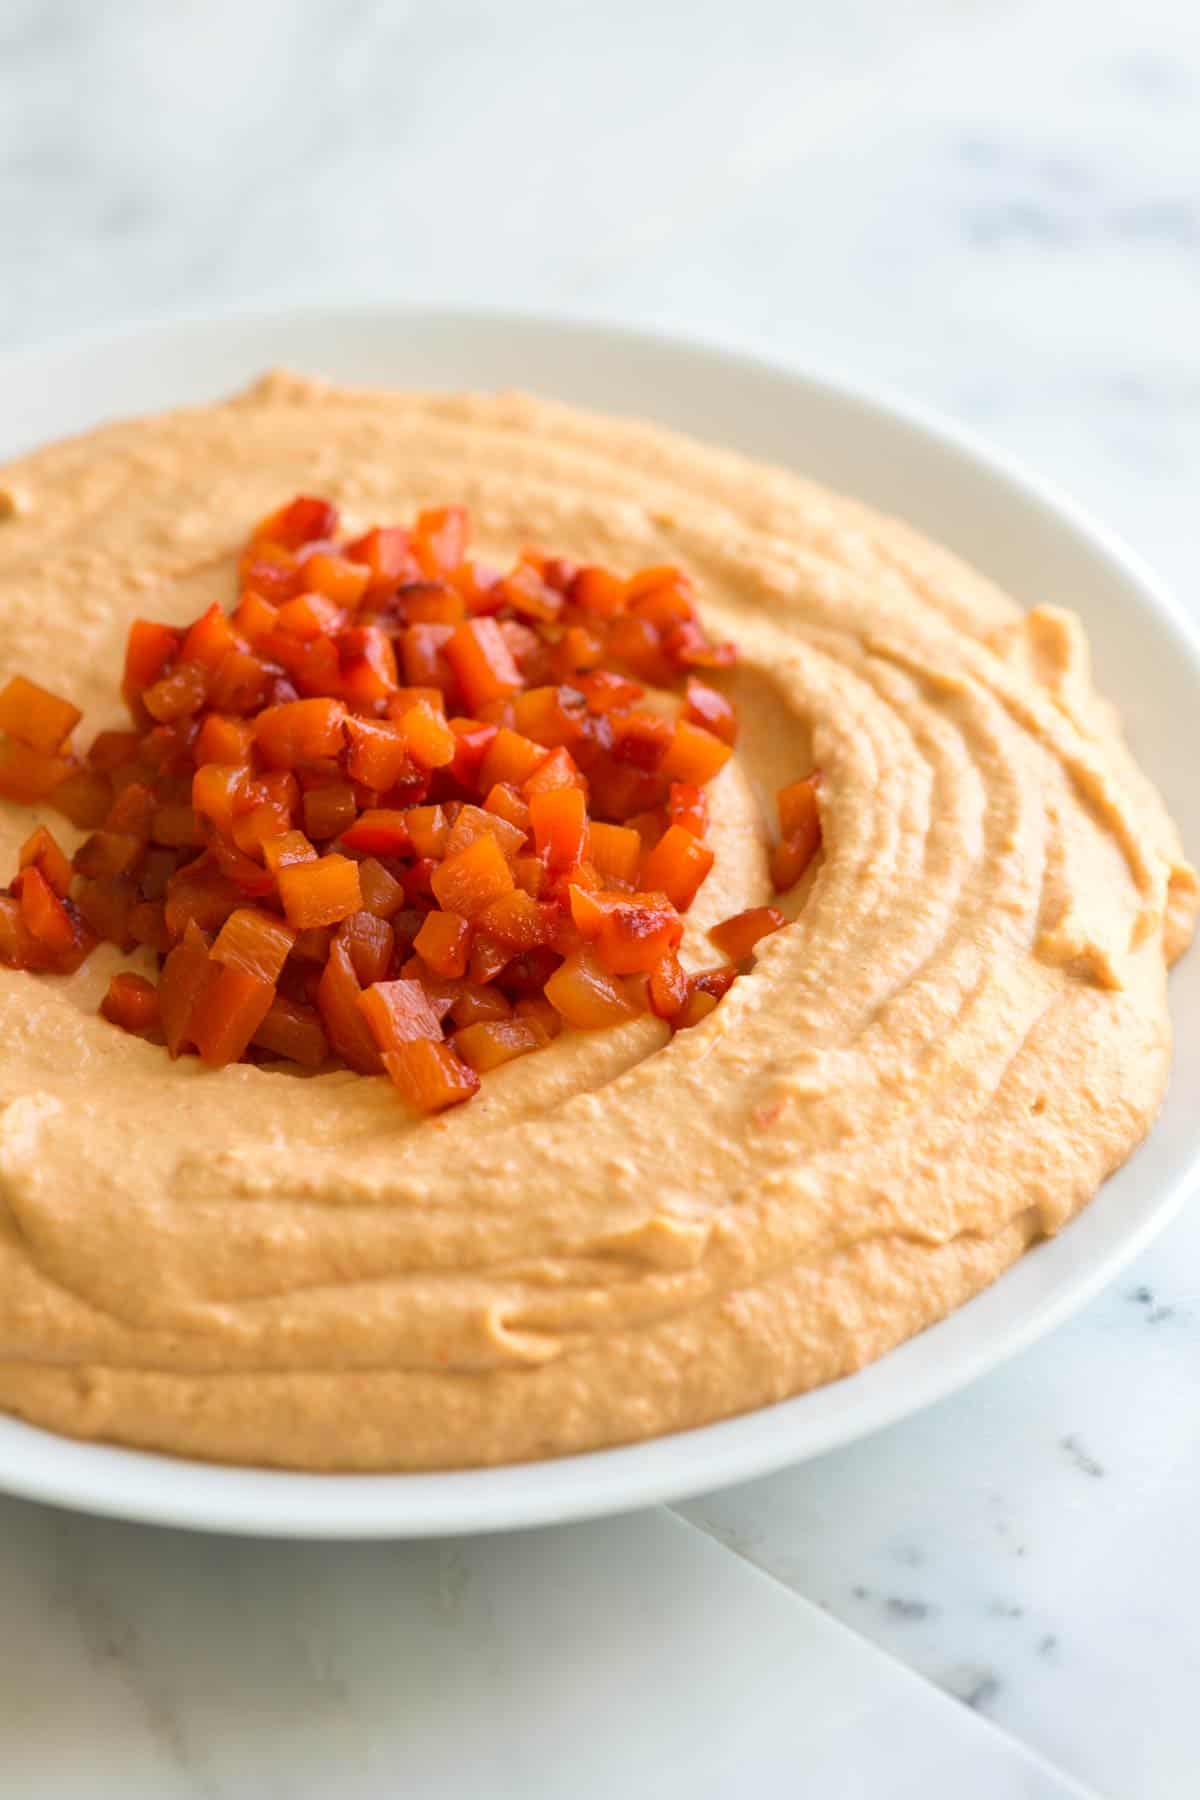 Easy roasted red pepper hummus recipe with sweet red bell peppers, chickpeas, garlic, and tahini.